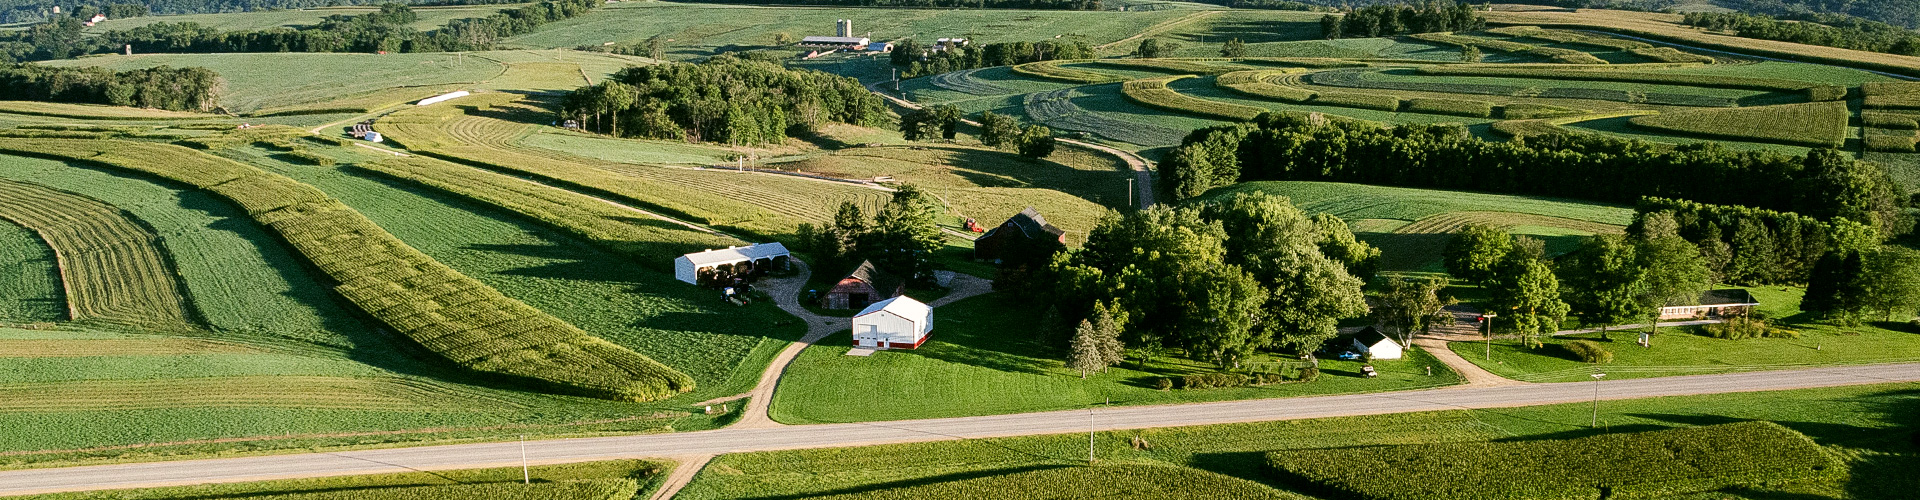 Arial photo of rolling hills showing a combination of crop rows, trees and farm buildings